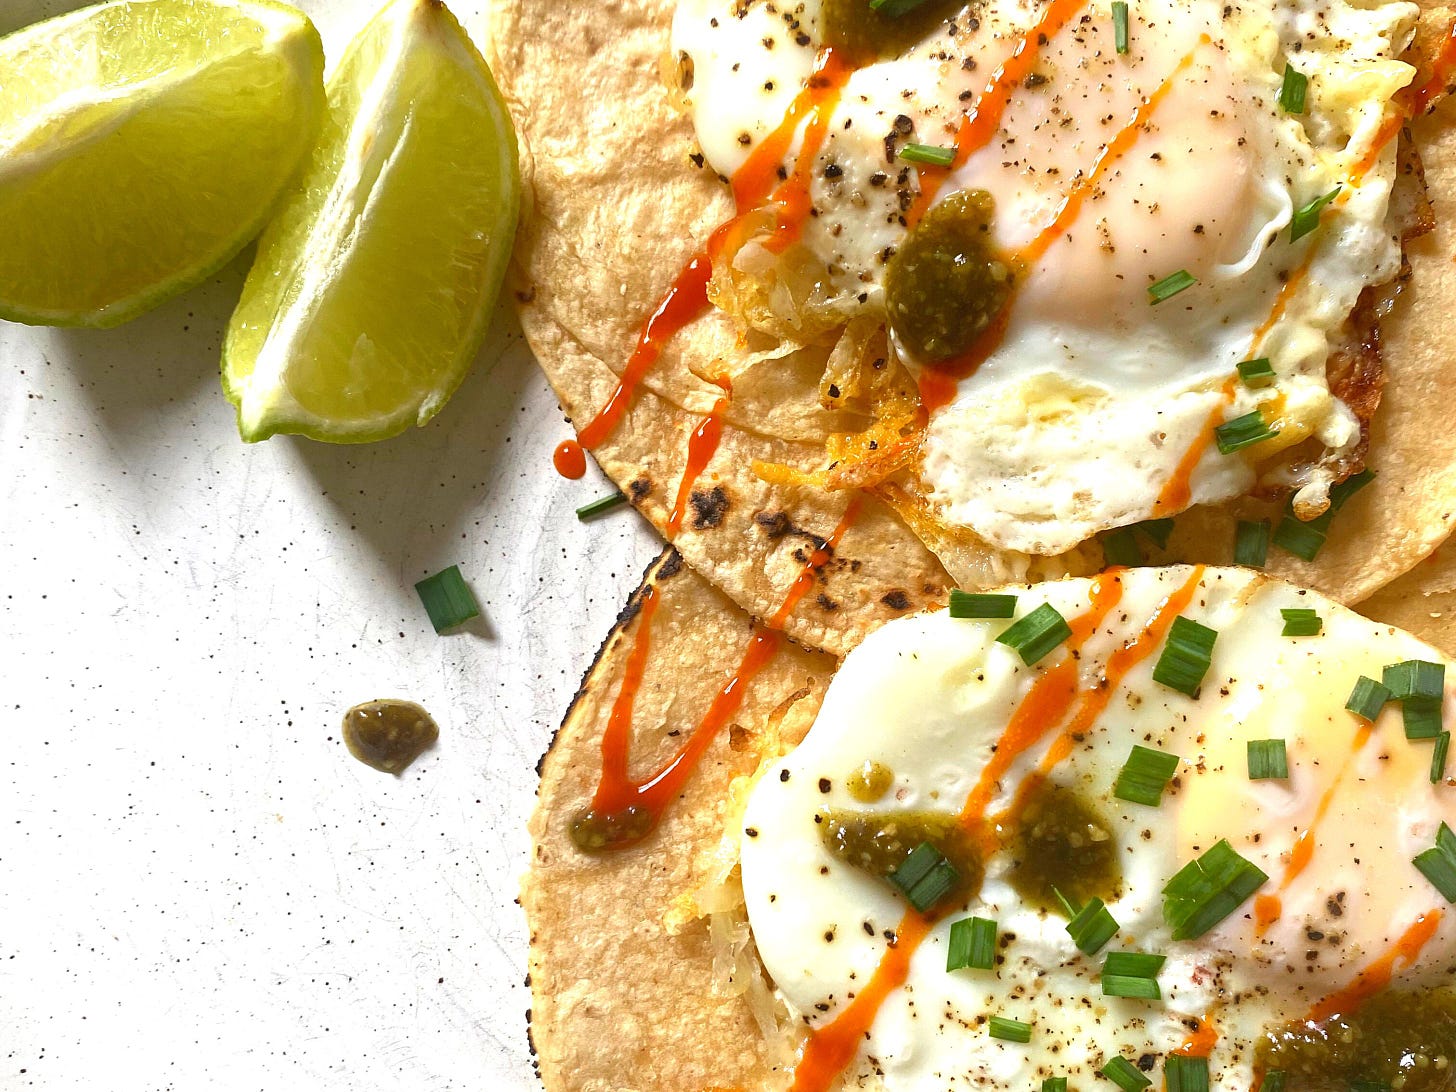 Two tortillas, topped with potato, eggs, hot sauce and green vegetable. Two lime wedges are placed next to it.